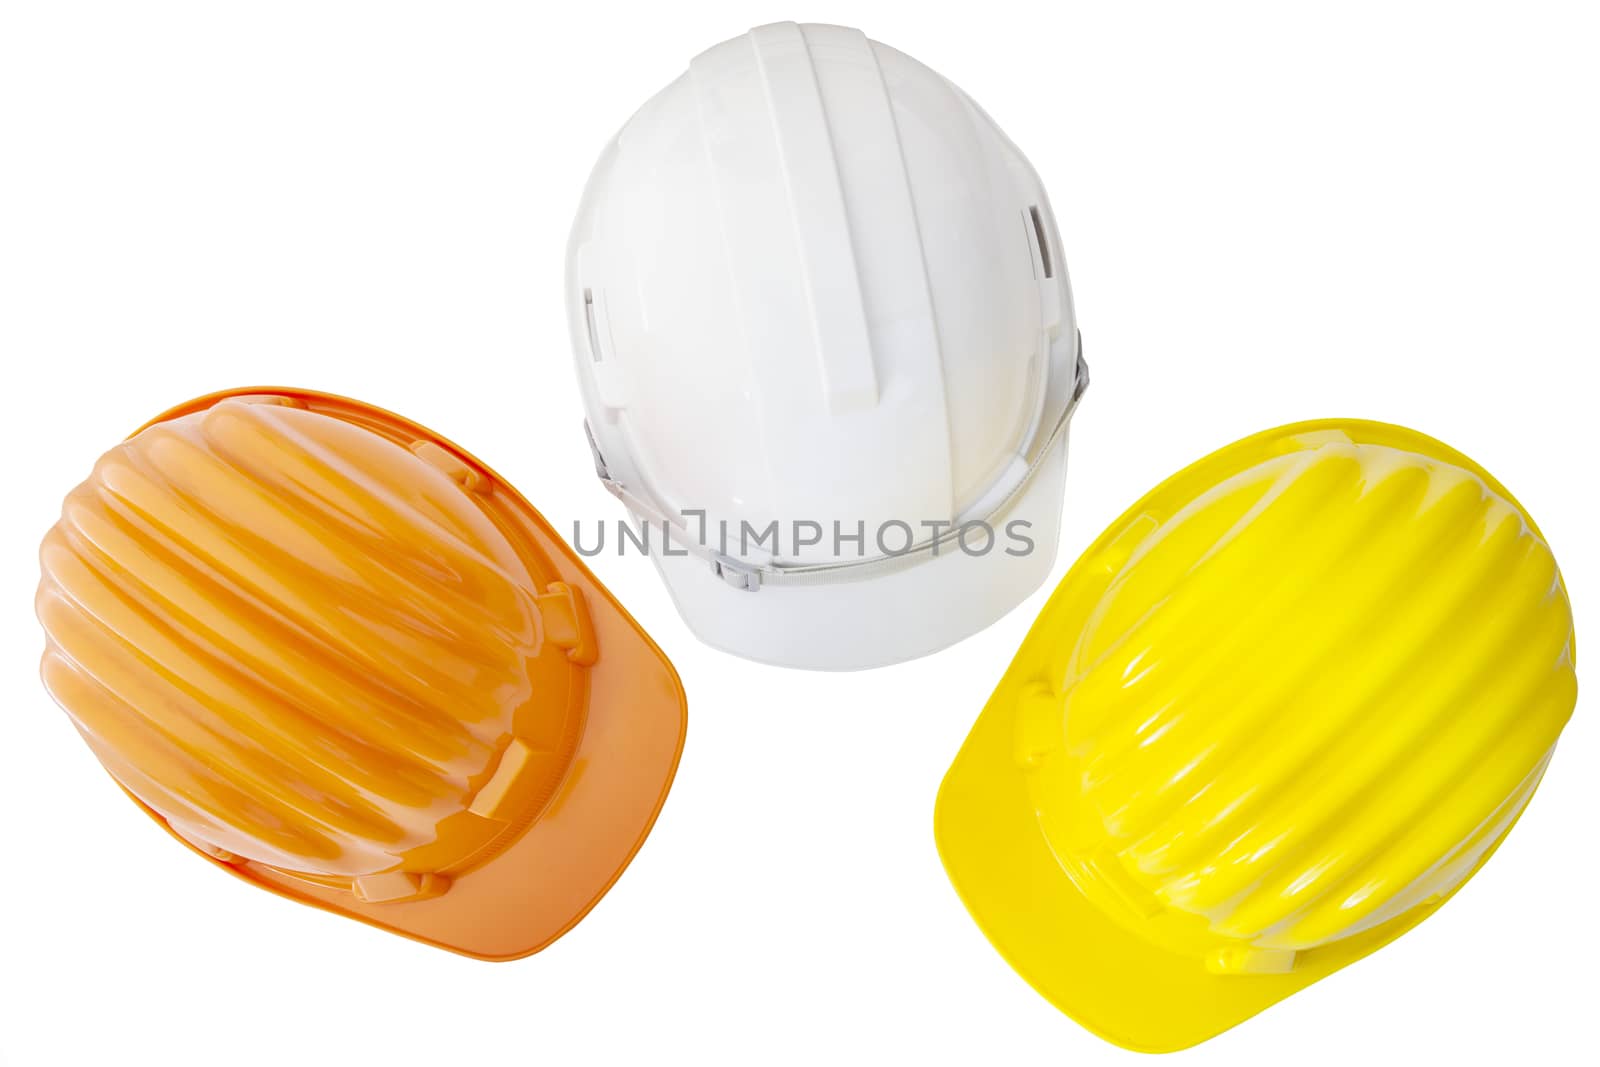 top view of multicolor safetyt,construction ,protection helmet  isolated white background